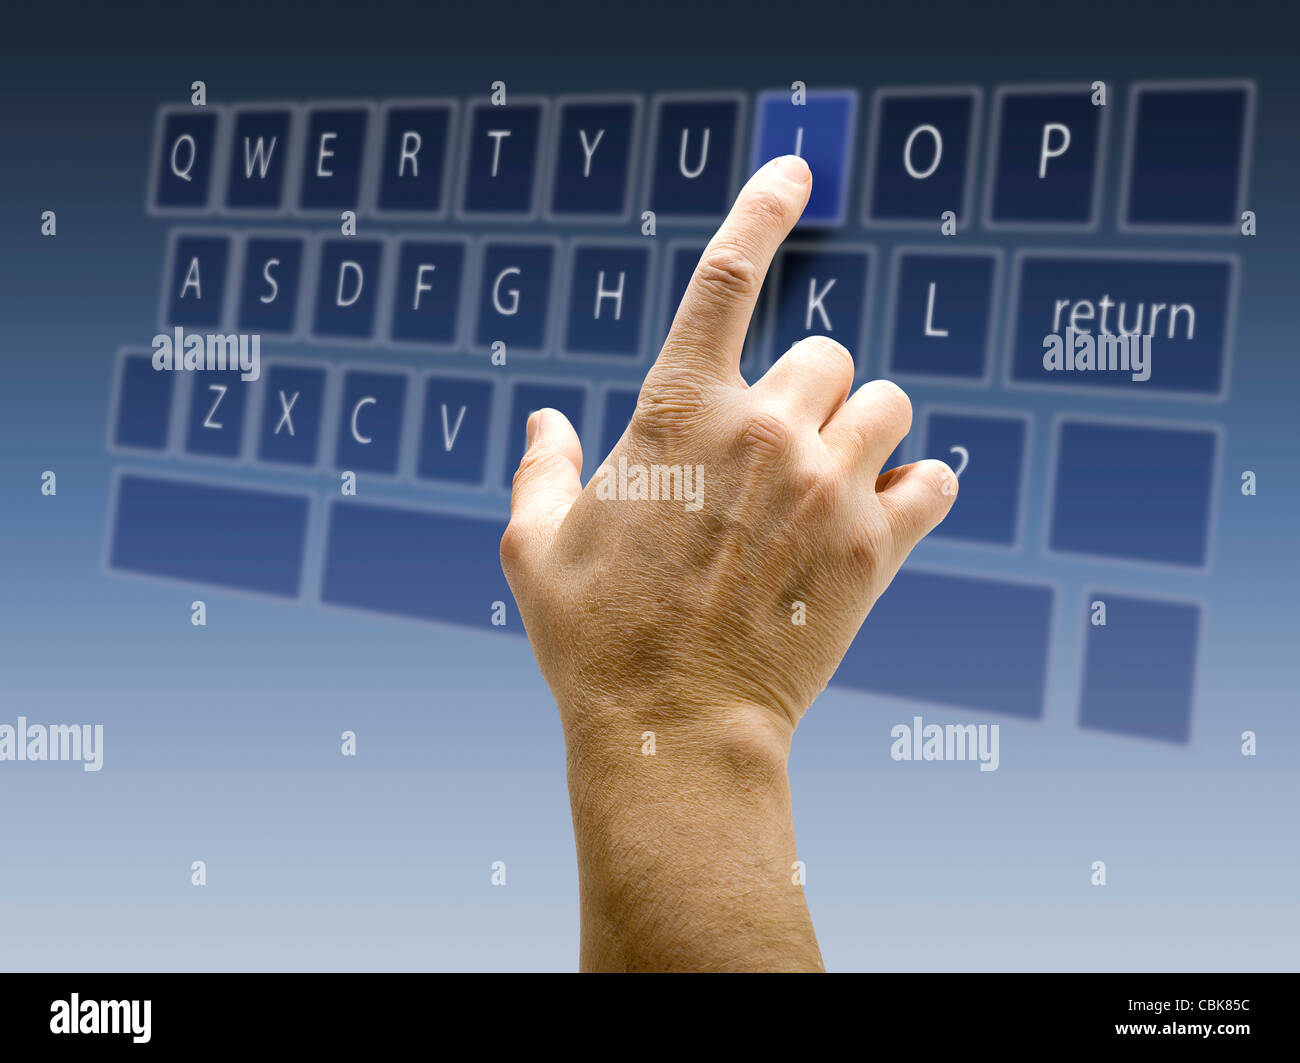 Touchscreen keyboard and interface Stock Photo